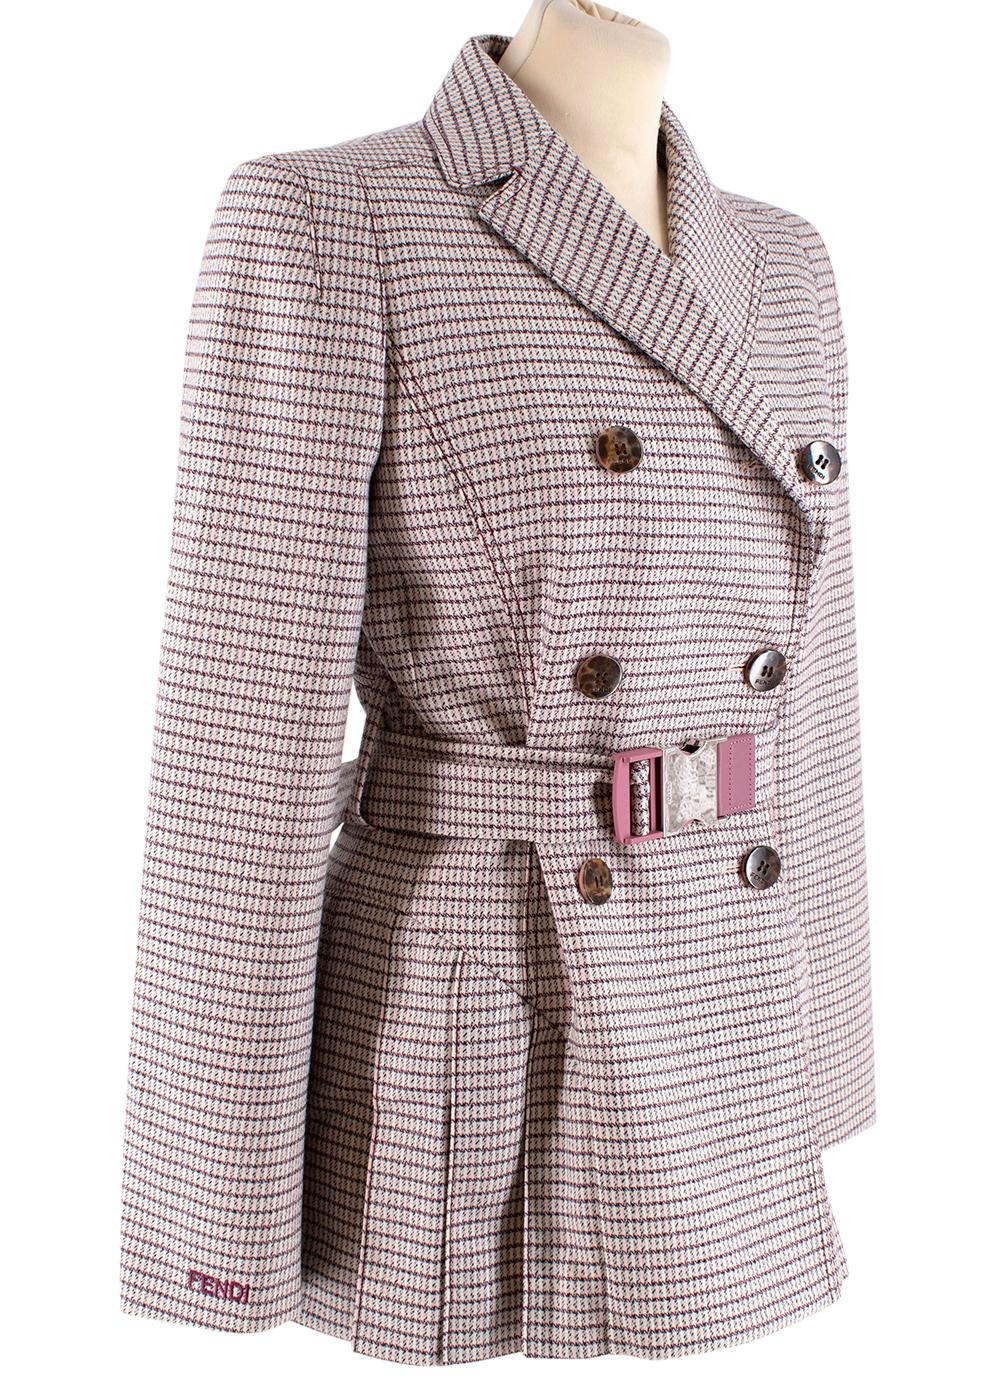 Fendi Aruba Pink Double-breasted Belted Jacket 

- Stunning tailored pink  herringbone tweed belted blazer
- Pleated from waist to hem
- Double breasted
- Notched lapels on collar
- Panels to add structure
- Fendi logo buttons 

Made in Italy

(Seam